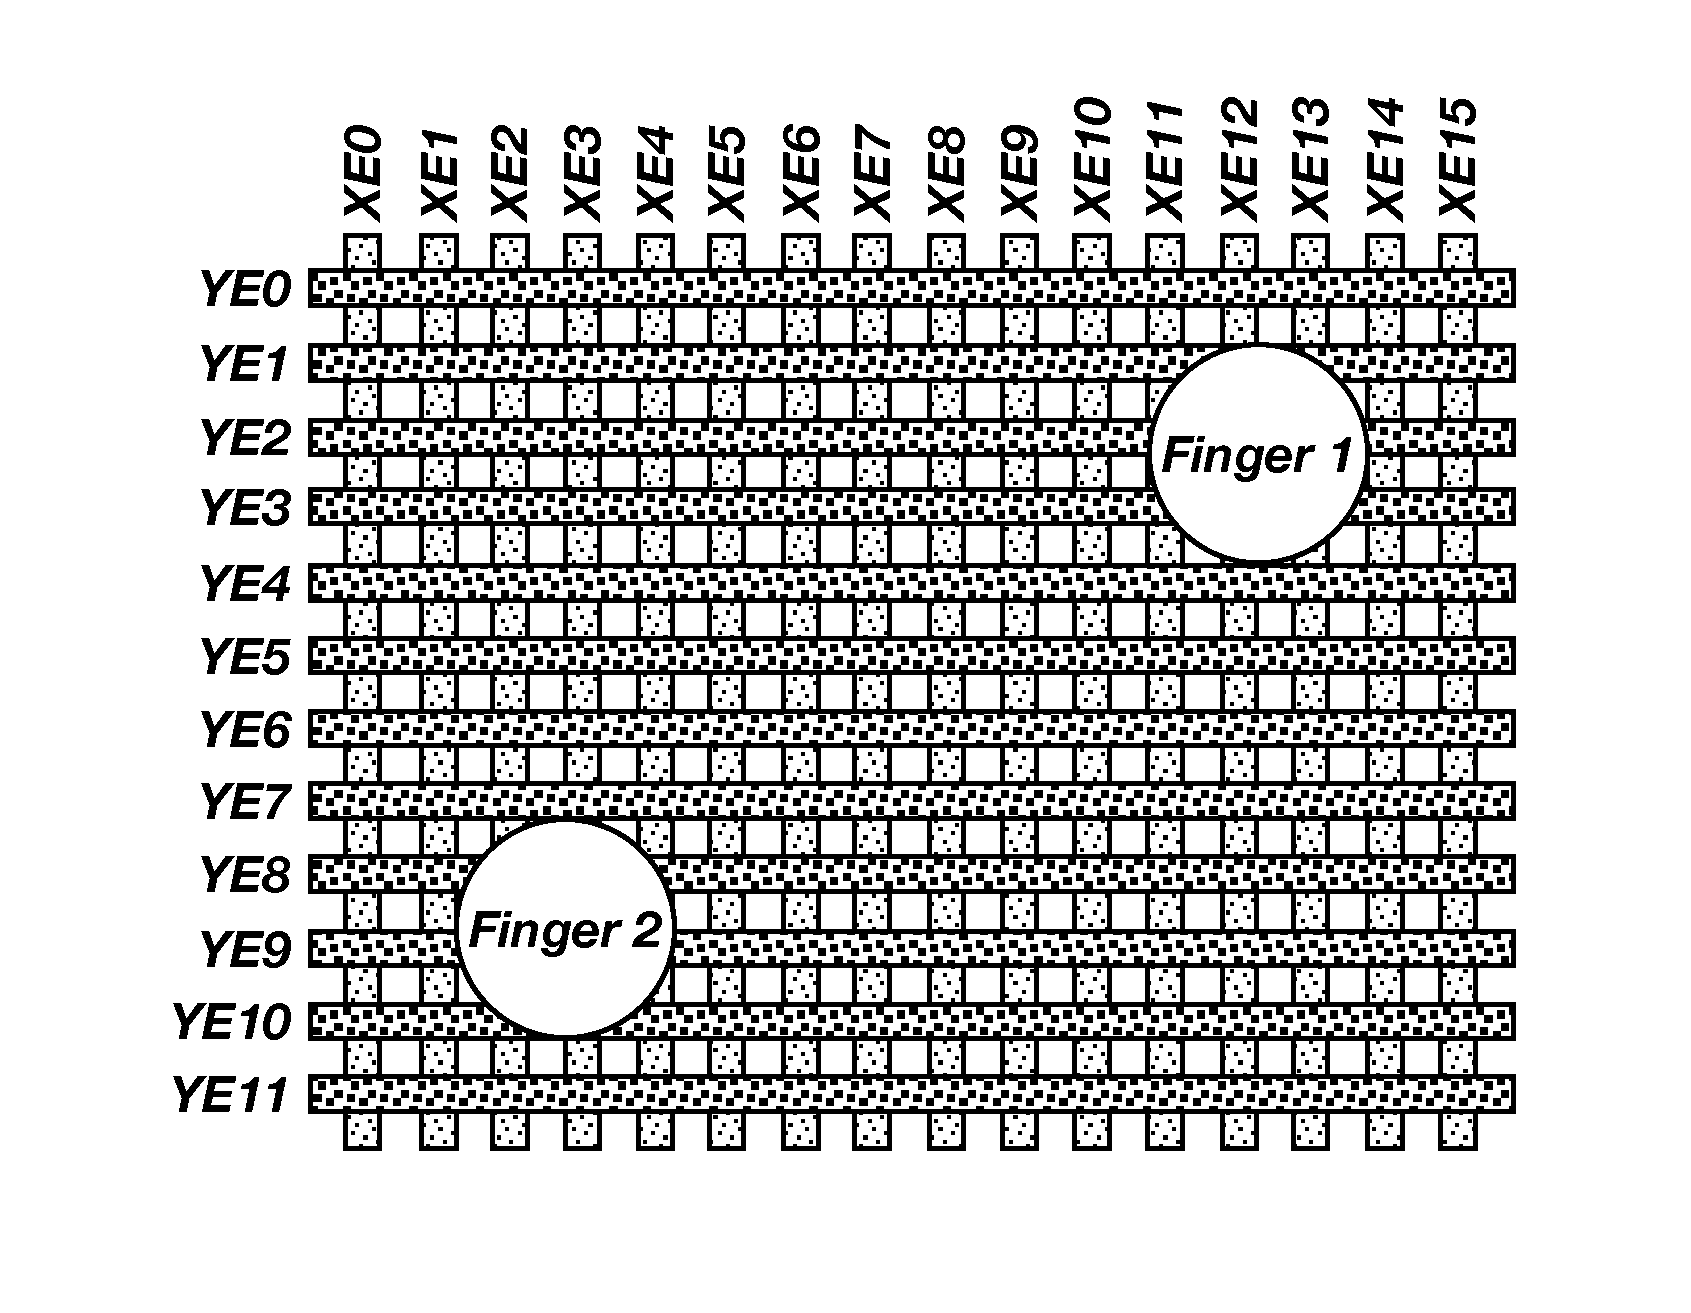 Reduction of noise and de-ghosting in a mutual capacitance multi-touch touchpad